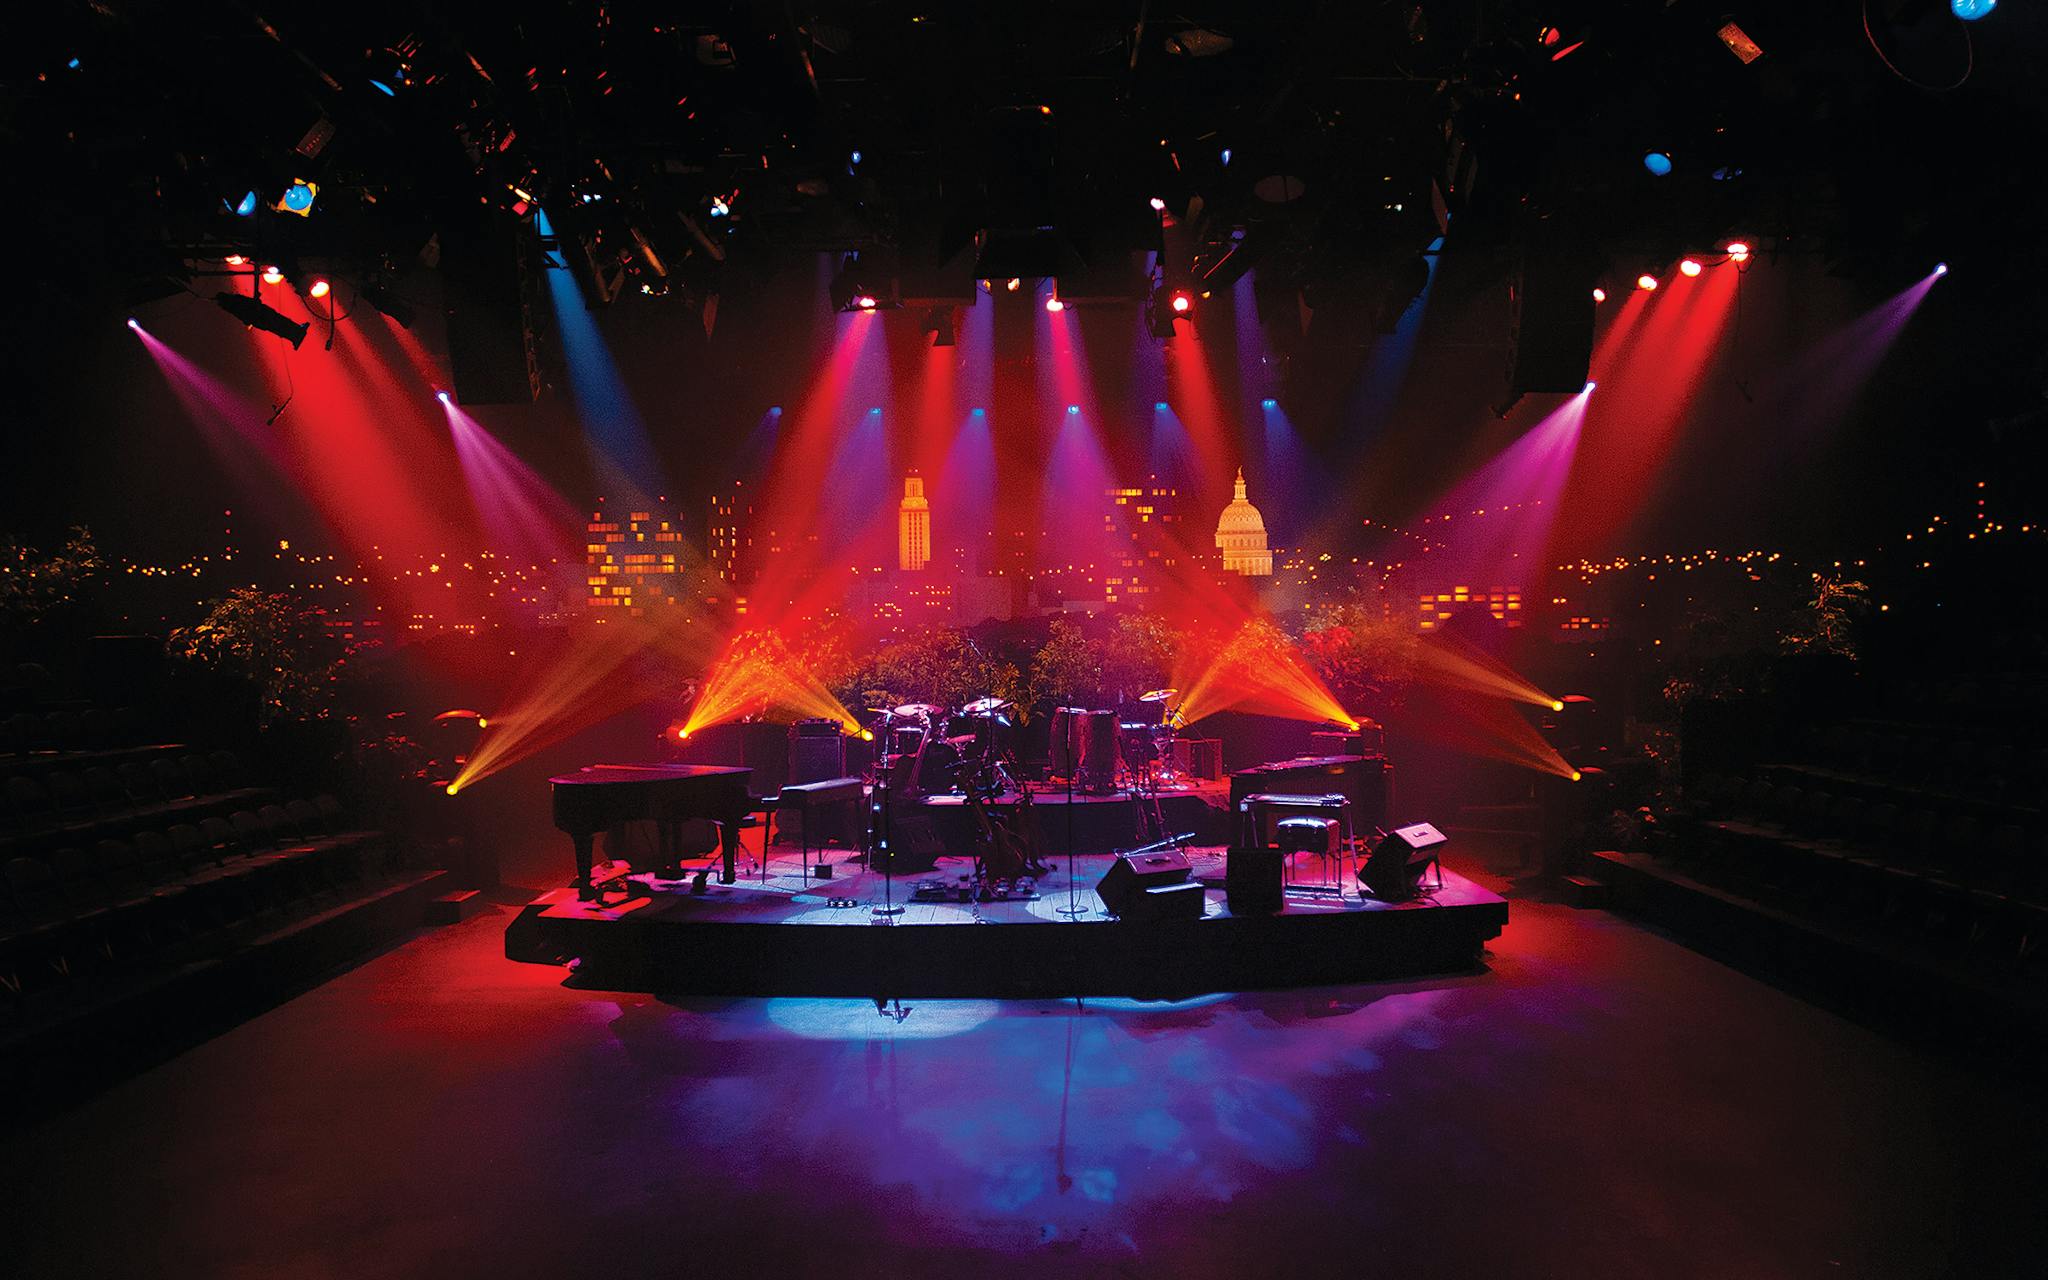 The Austin City Limits stage in 2008.